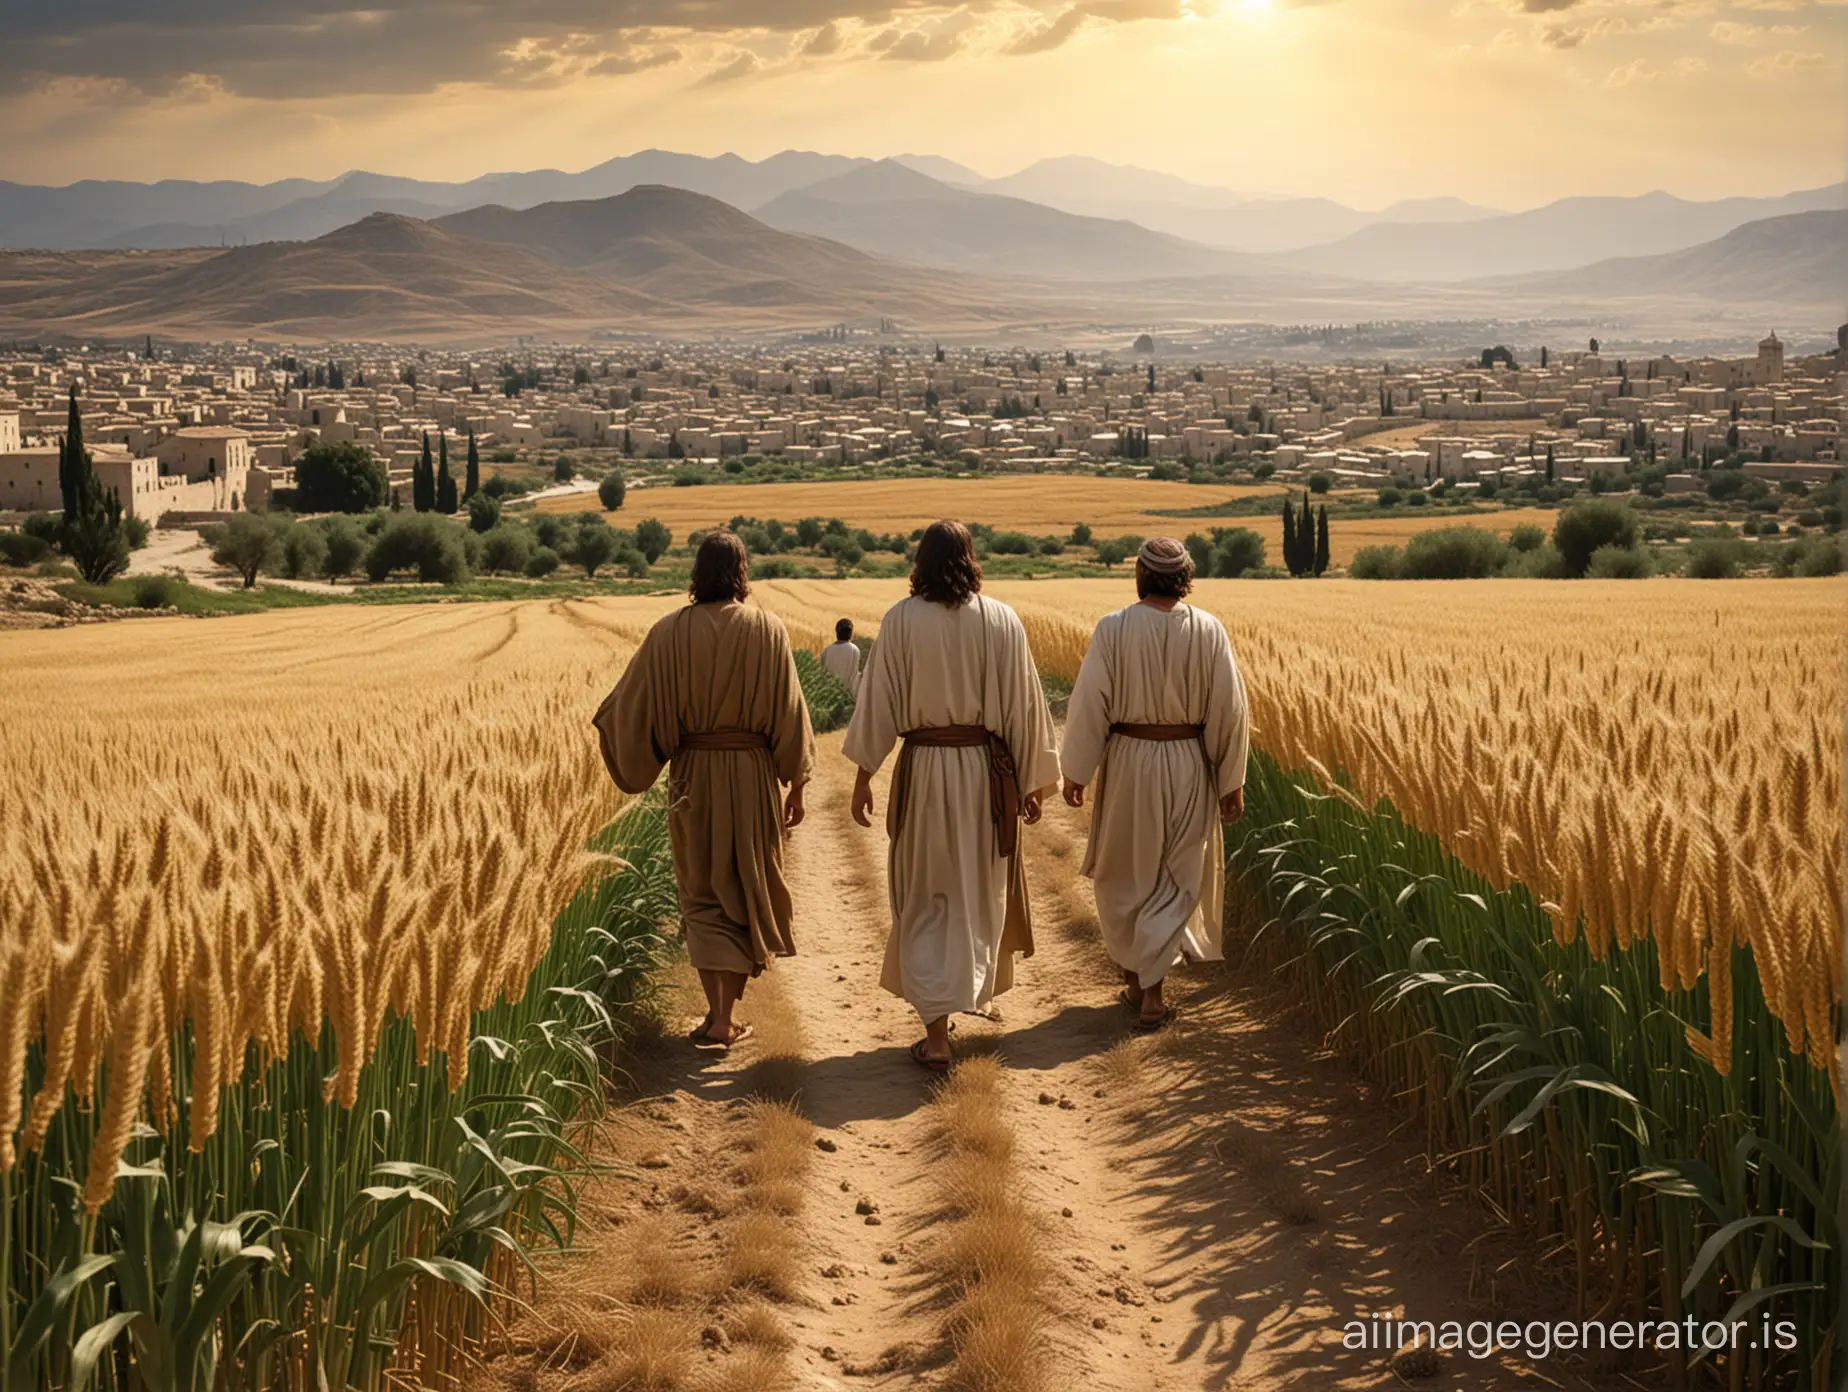 Jesus walks through a wheat field with his disciples. In the background the mountains and the old town of Judea in Palestine from the 1st century